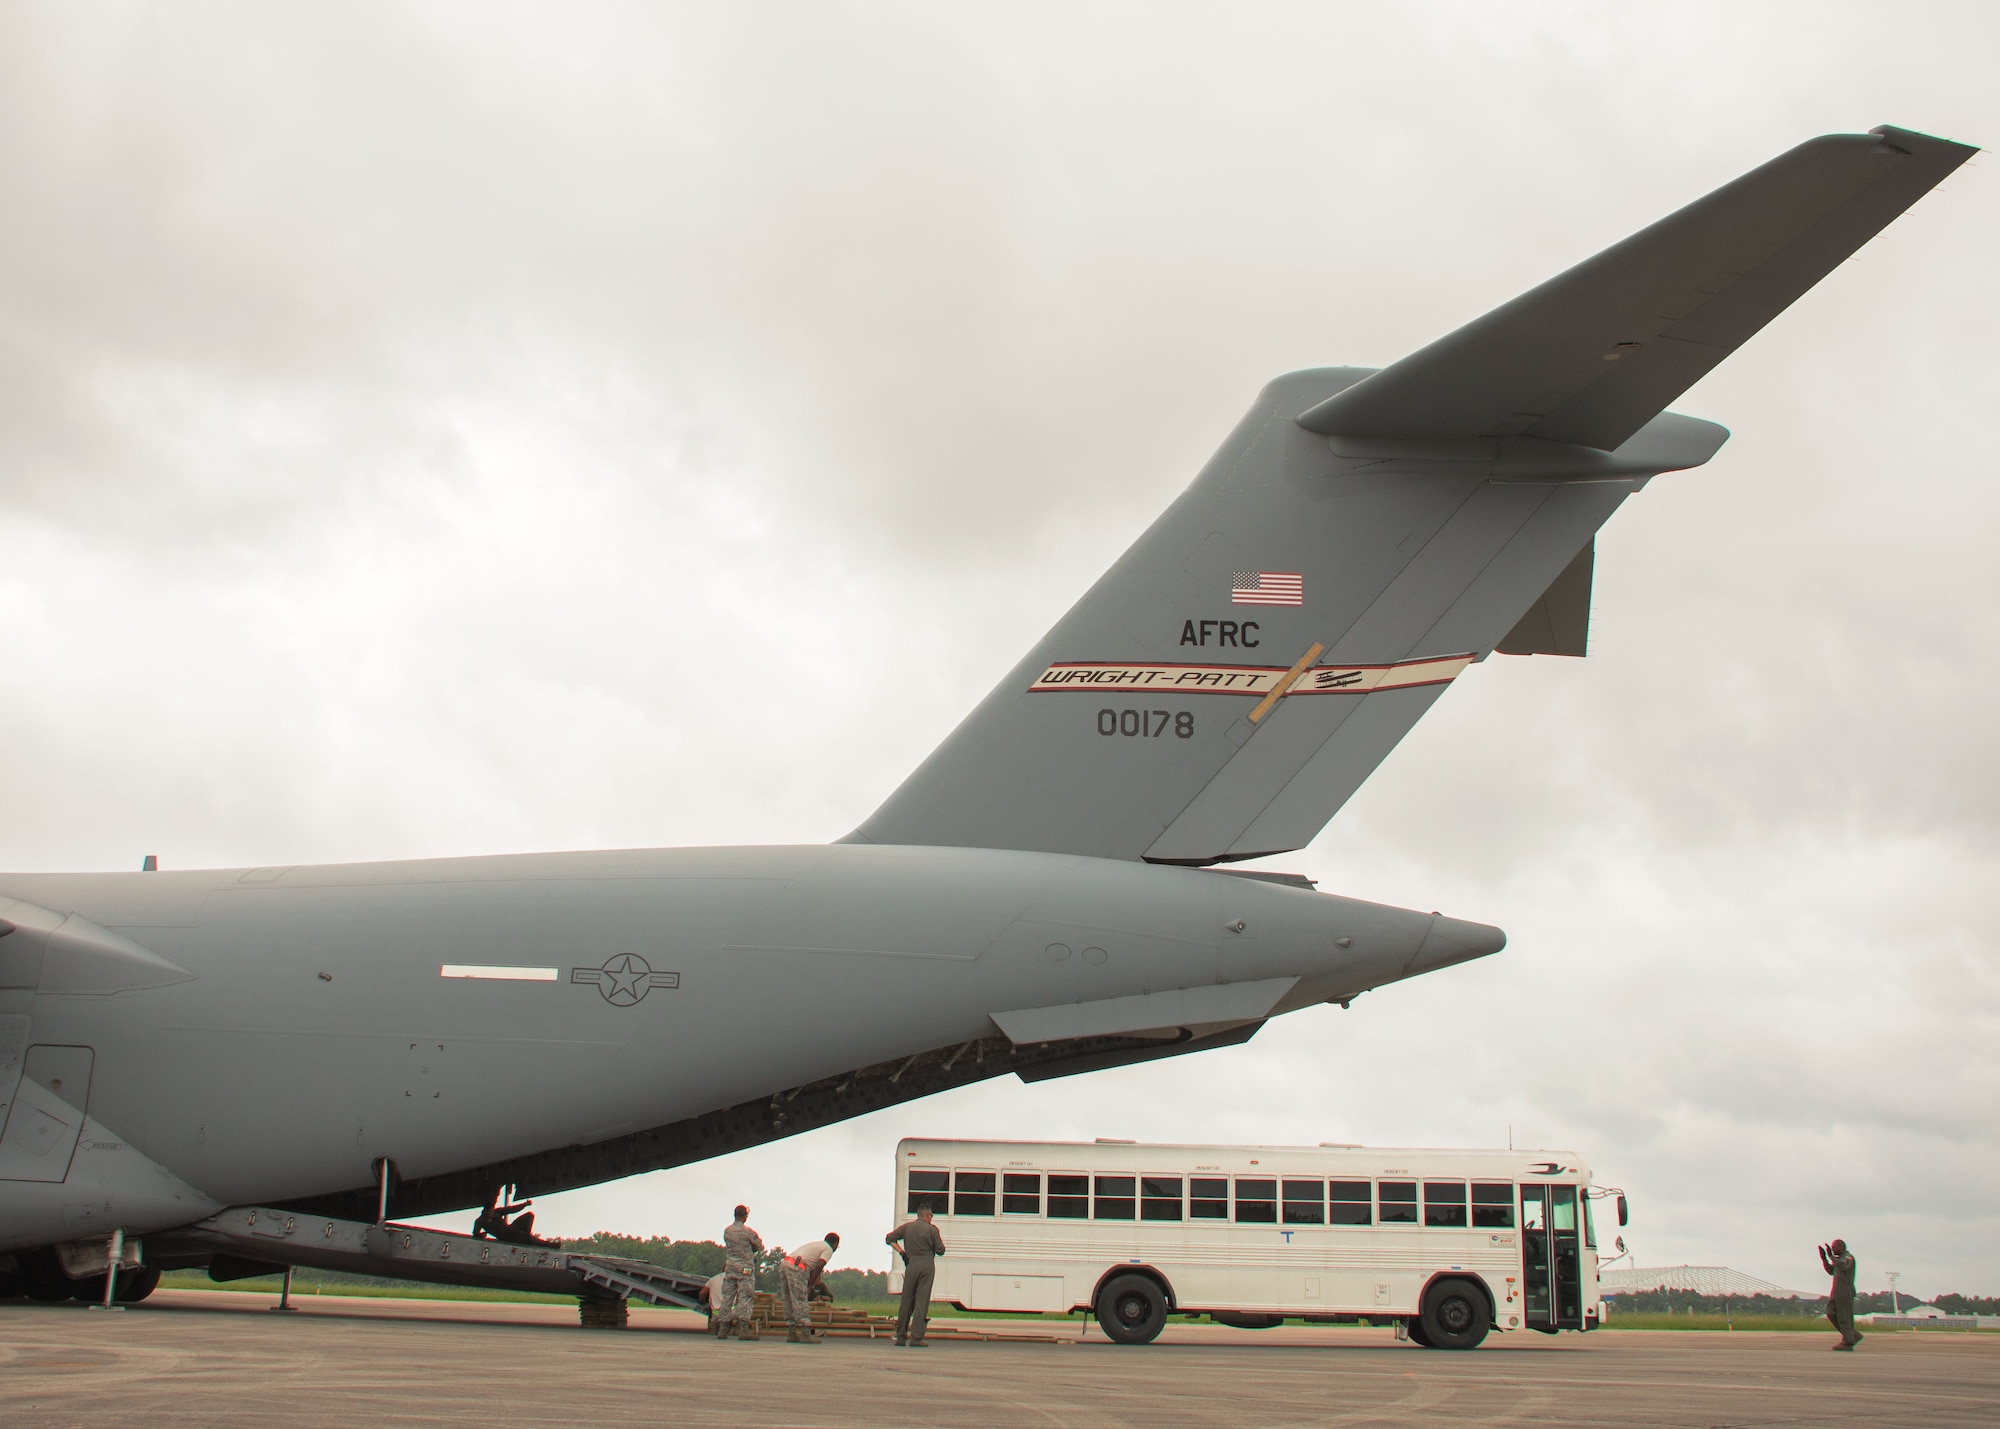 Aerial porters with the Patriot Warrior Exercise load a bus onto the back of a C-17 Globemaster III at Dobbins Air Reserve Base, Ga. Aug. 7, 2017. Aerial porters loaded a variety of items including equipment, cargo and personnel required to support the fight at the simulated frontlines of the exercise. (U.S. Air Force photo/Staff Sgt. Andrew Park)